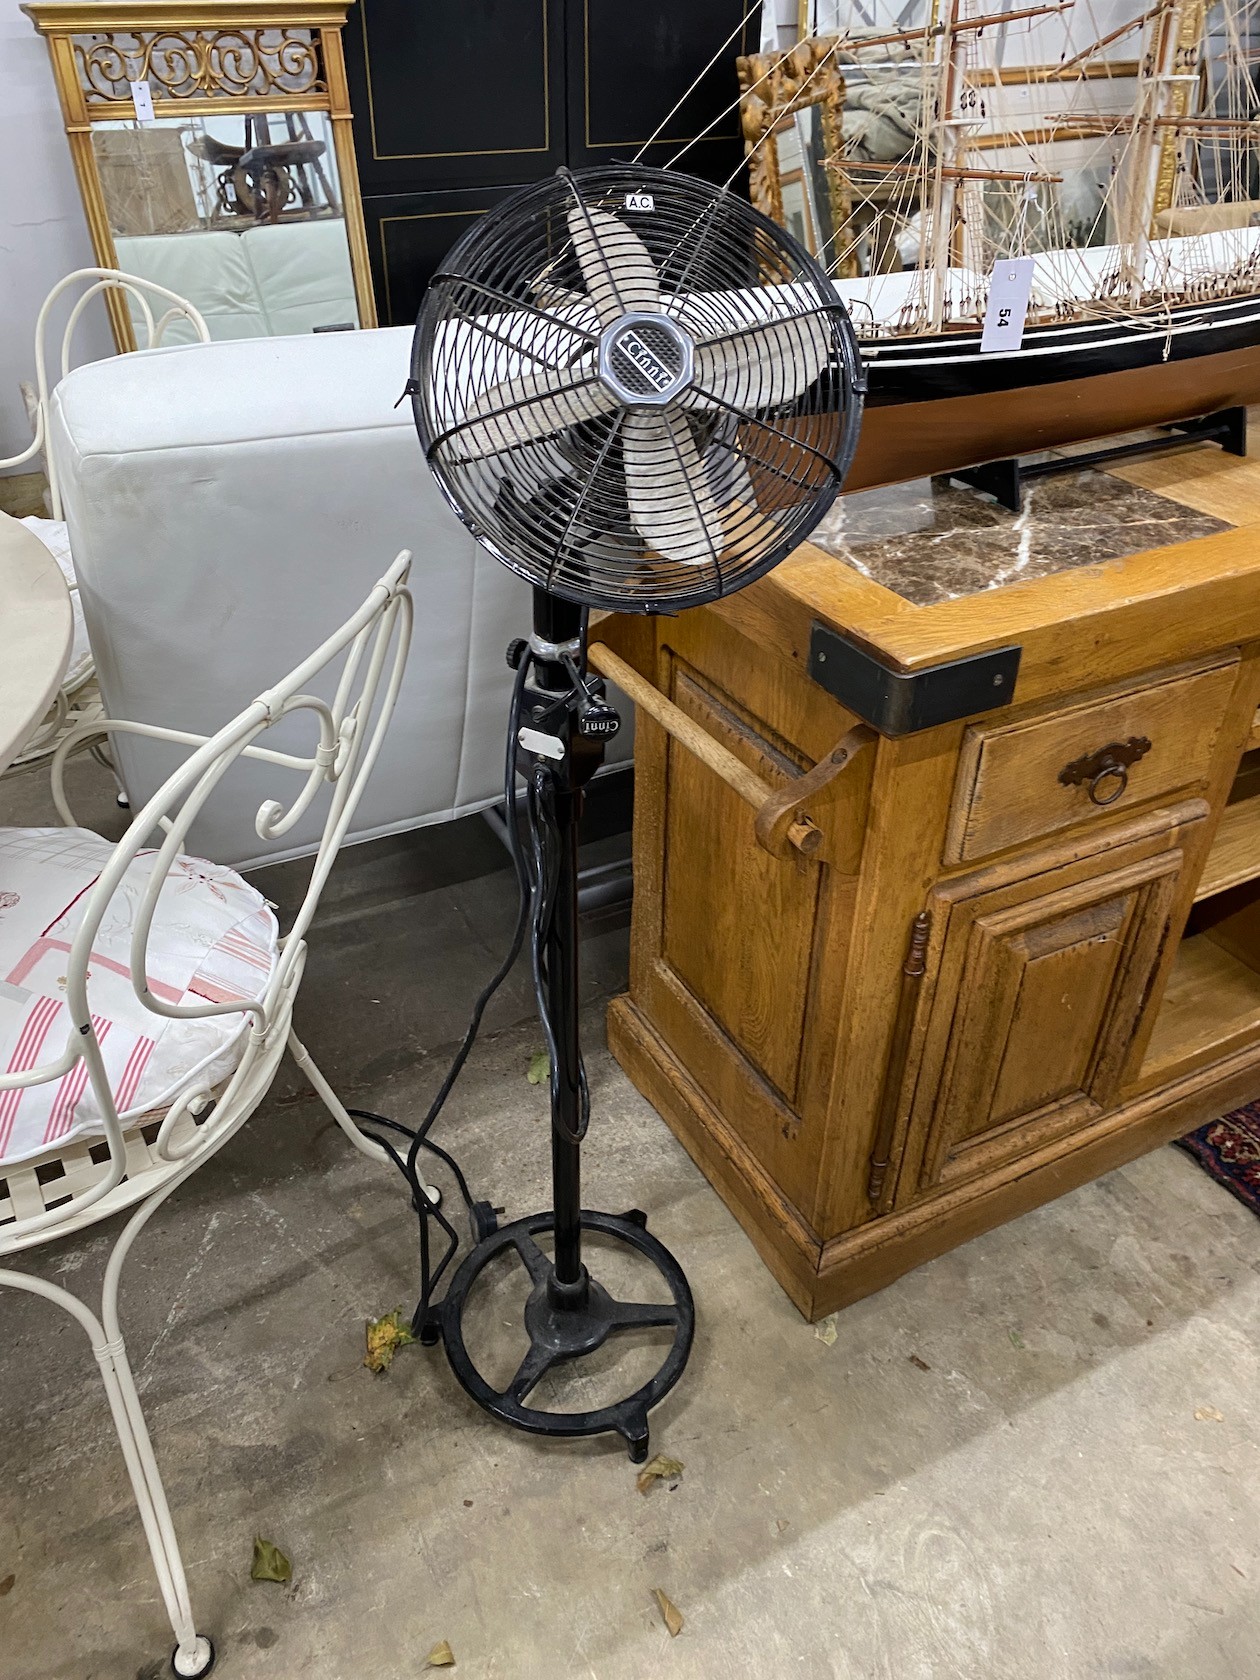 A Cinni vintage style fan, height 114cm                                                                                                                                                                                     